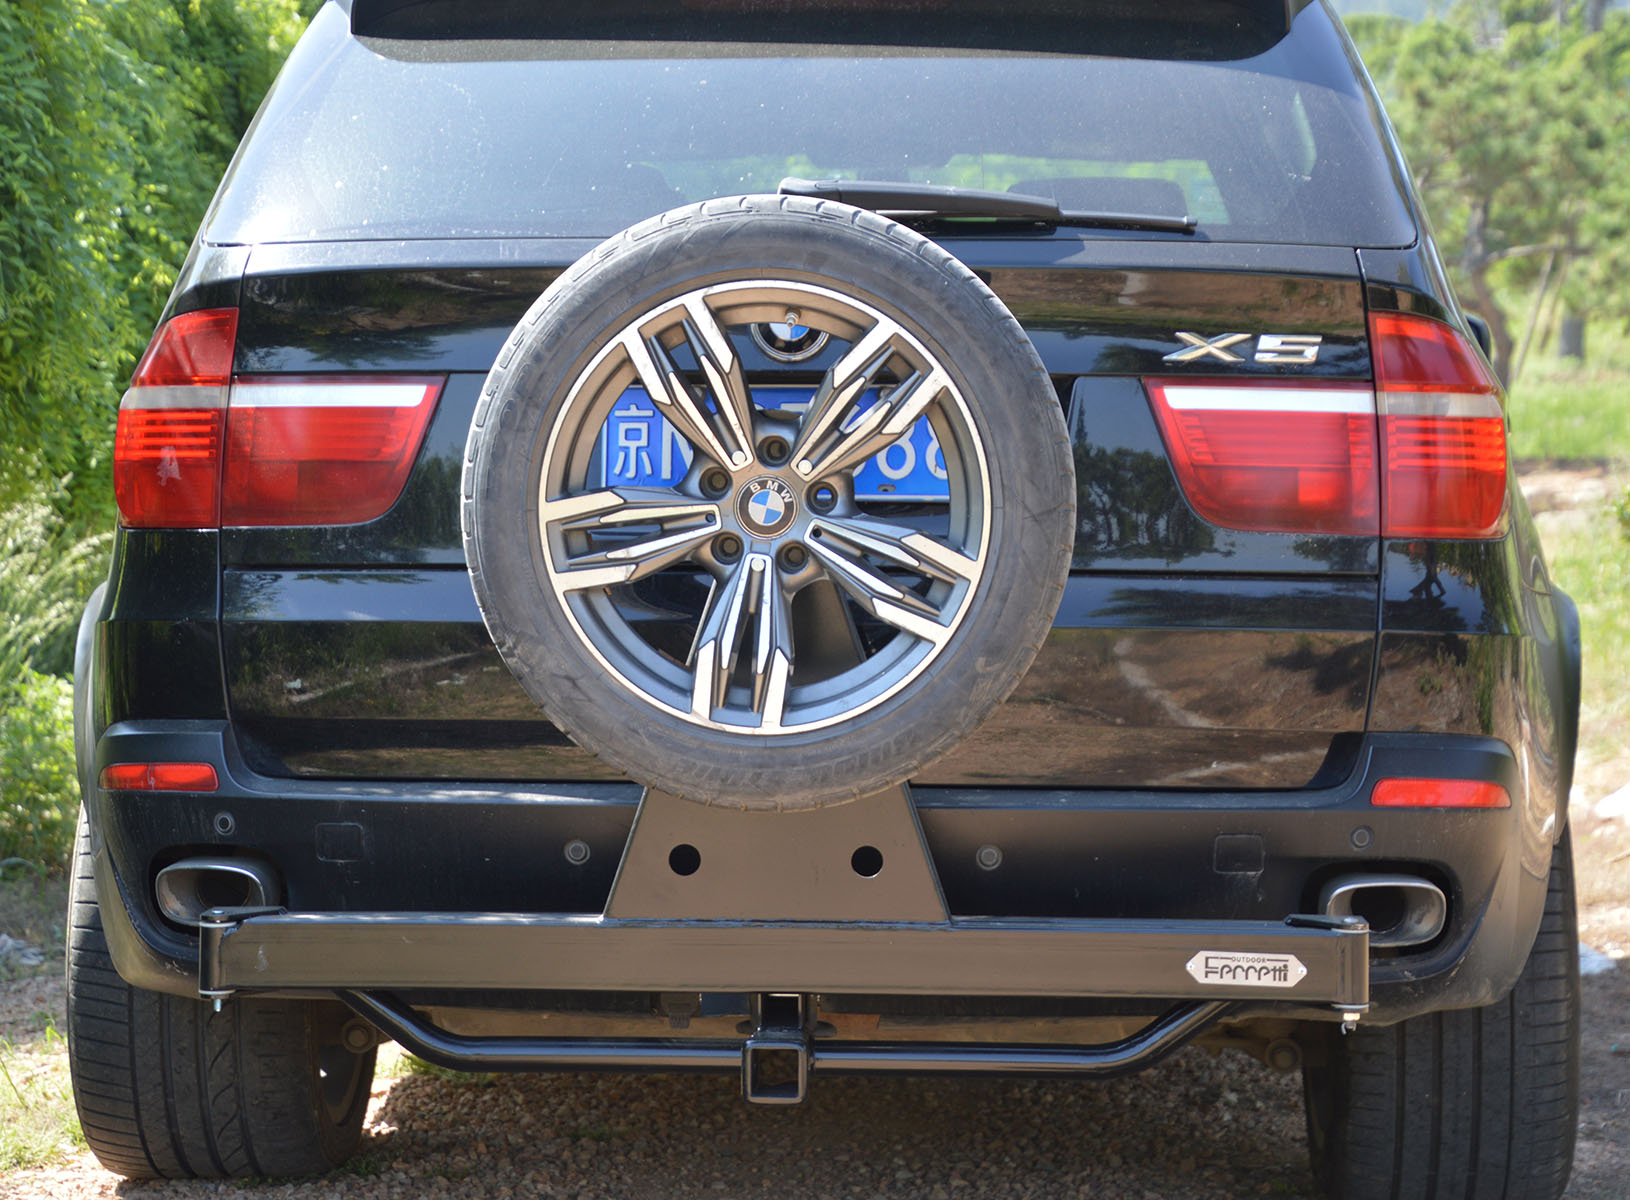 universally Offroad Hitchgate Offset spare tire carrier